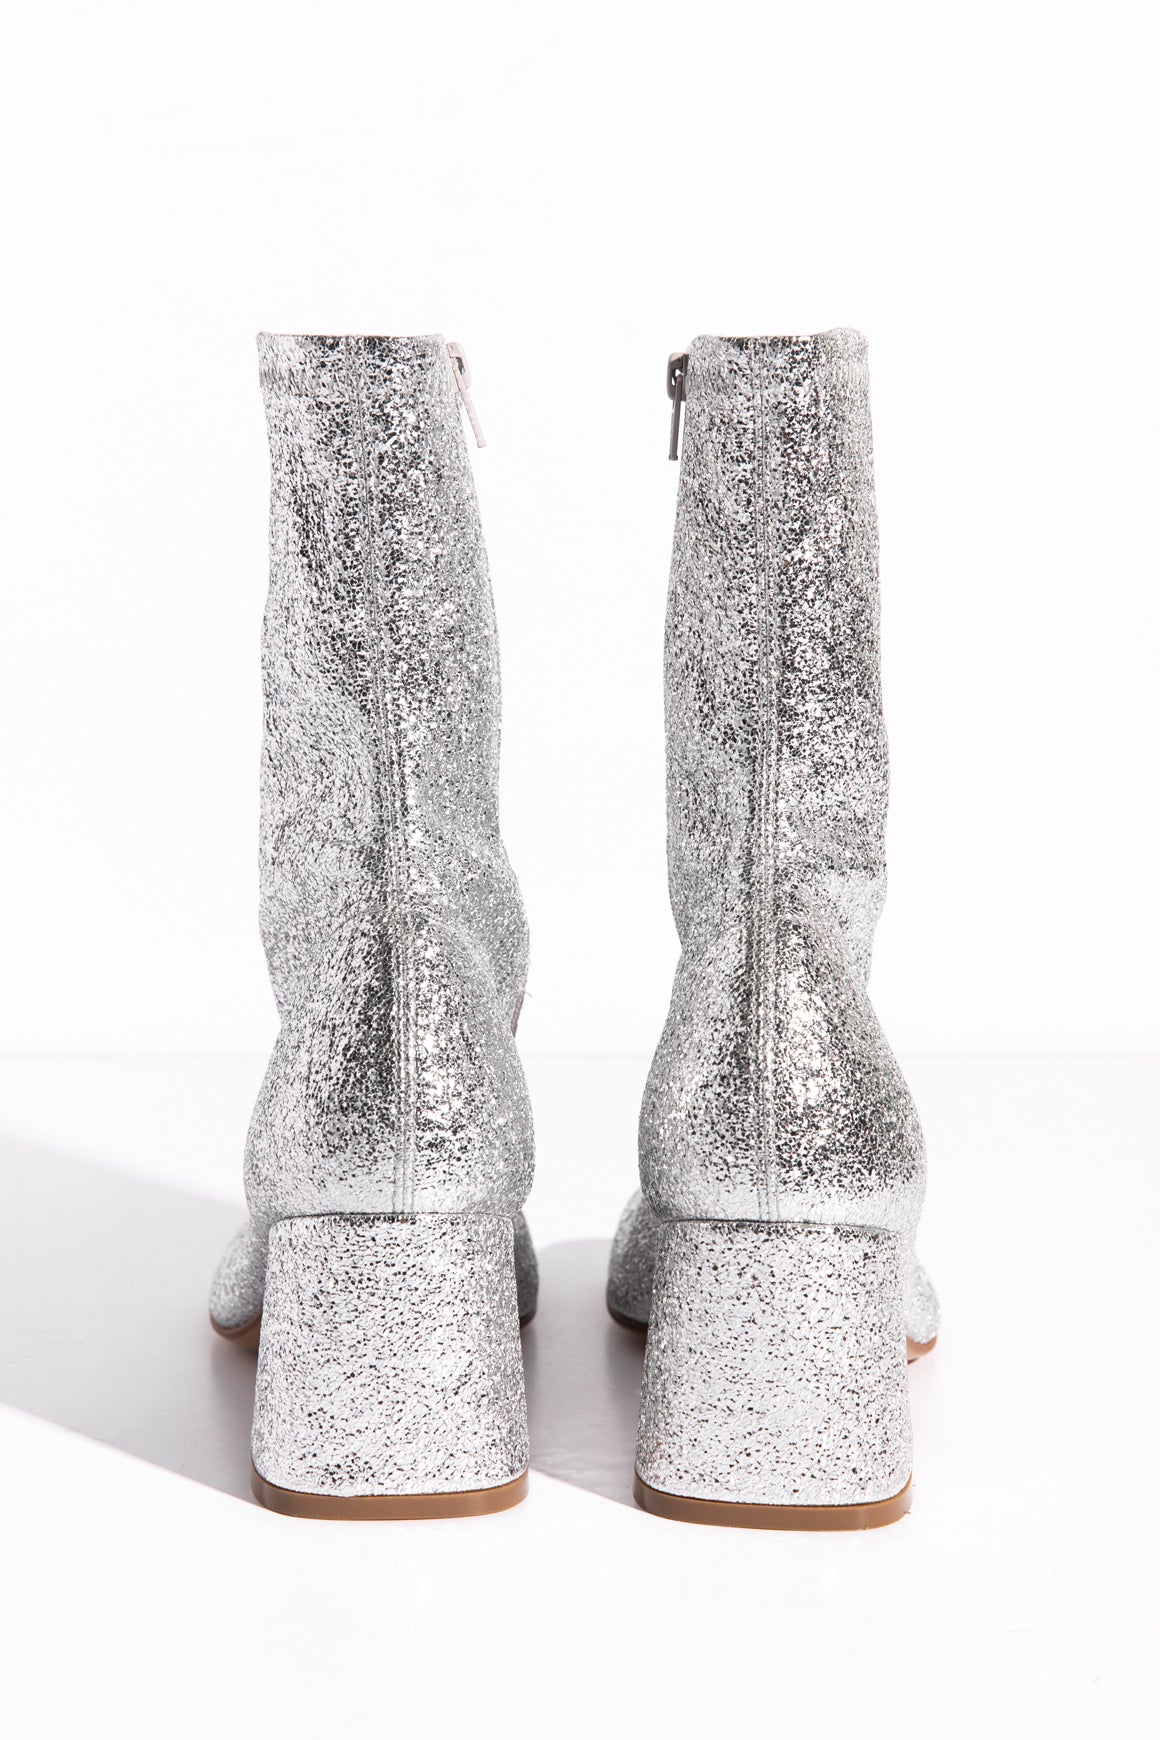 DRIES VAN NOTEN Silver Ankle Boots (Sz. 38) | MOSS Consignment